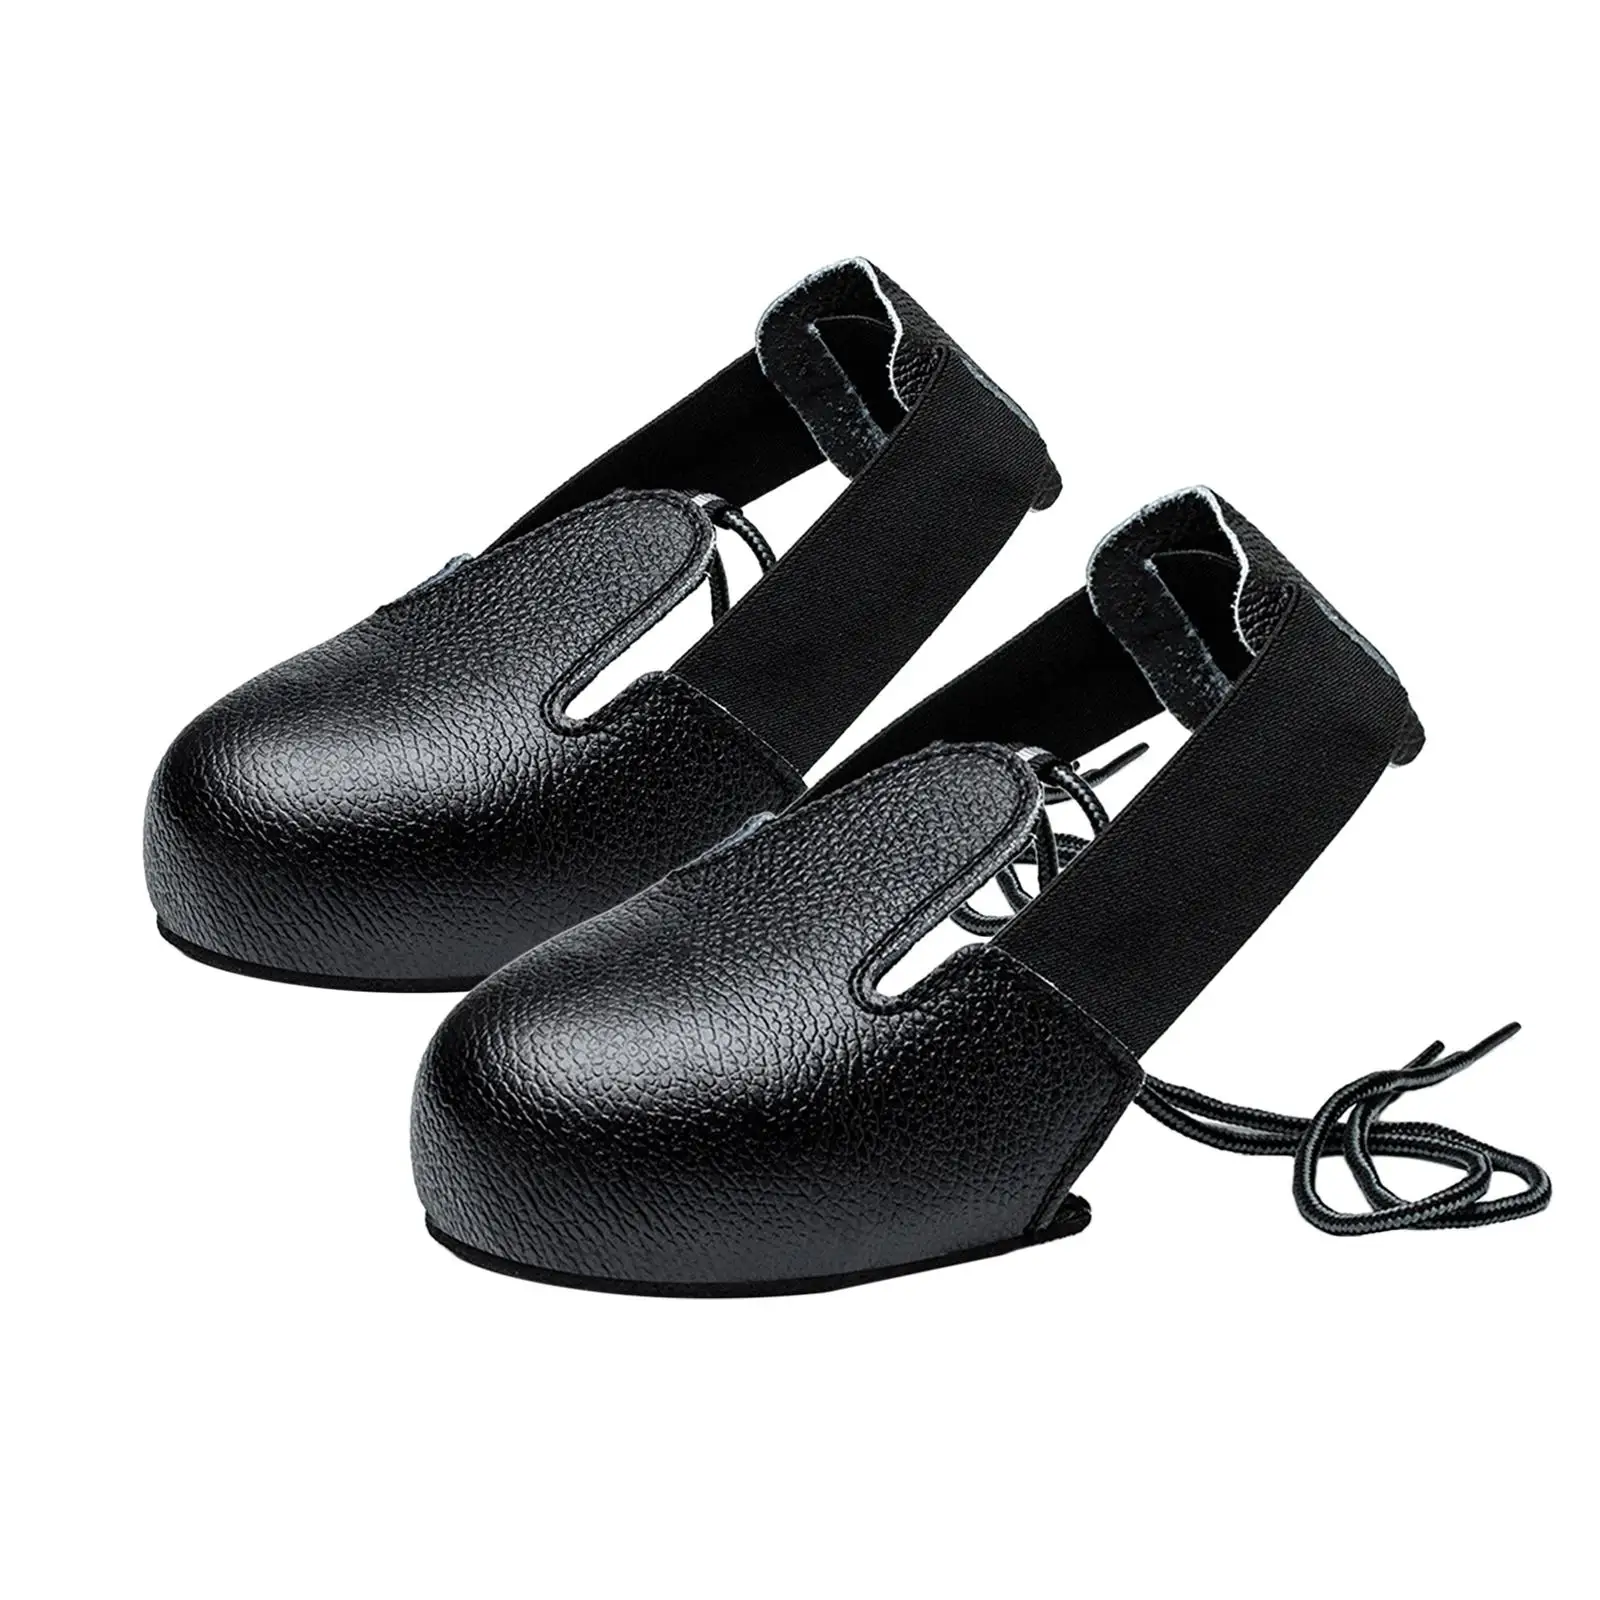 2Pcs Toe Safe Shoe Cover Multipurpose Protective Shoe Covers Anti Smash Cover Toe Cap Safe Overshoes for Industry Workplace